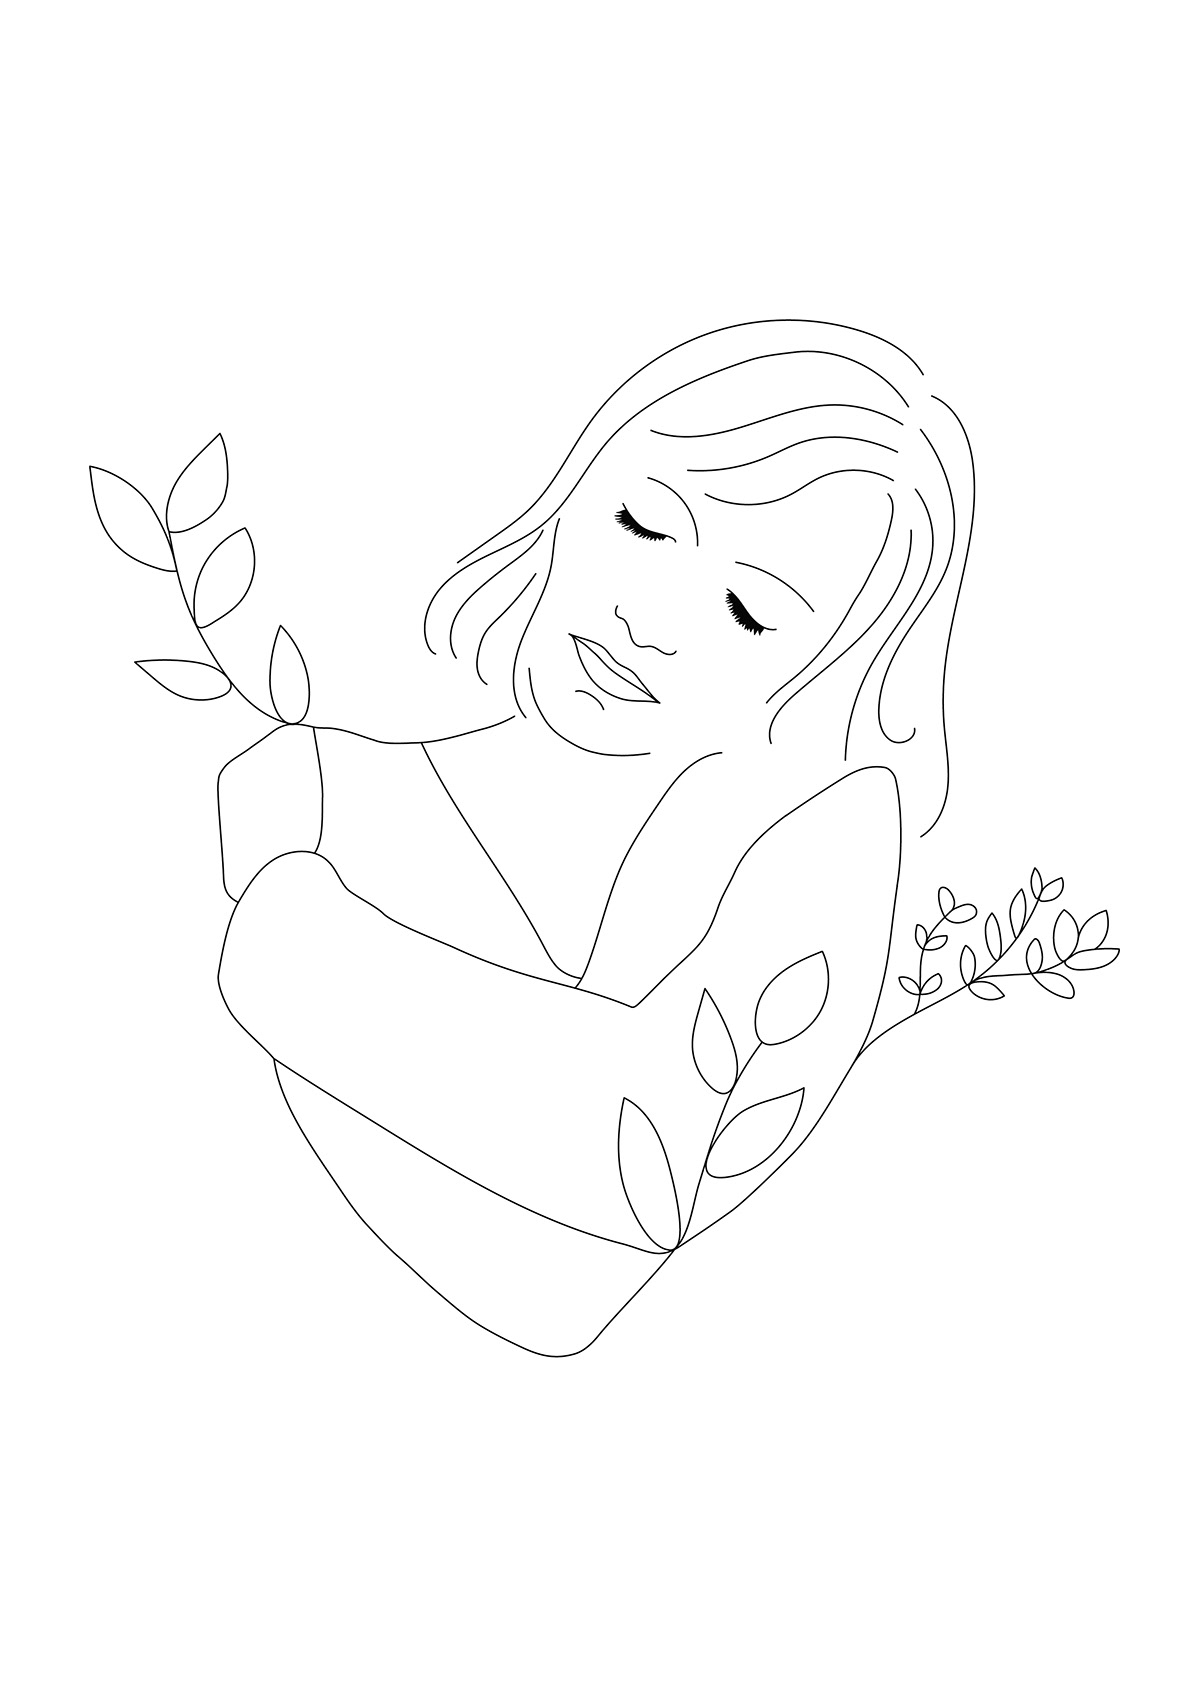 black and white Editorial Illustration linedrawing mindfulness minimal NatureLover peace selfcare woman